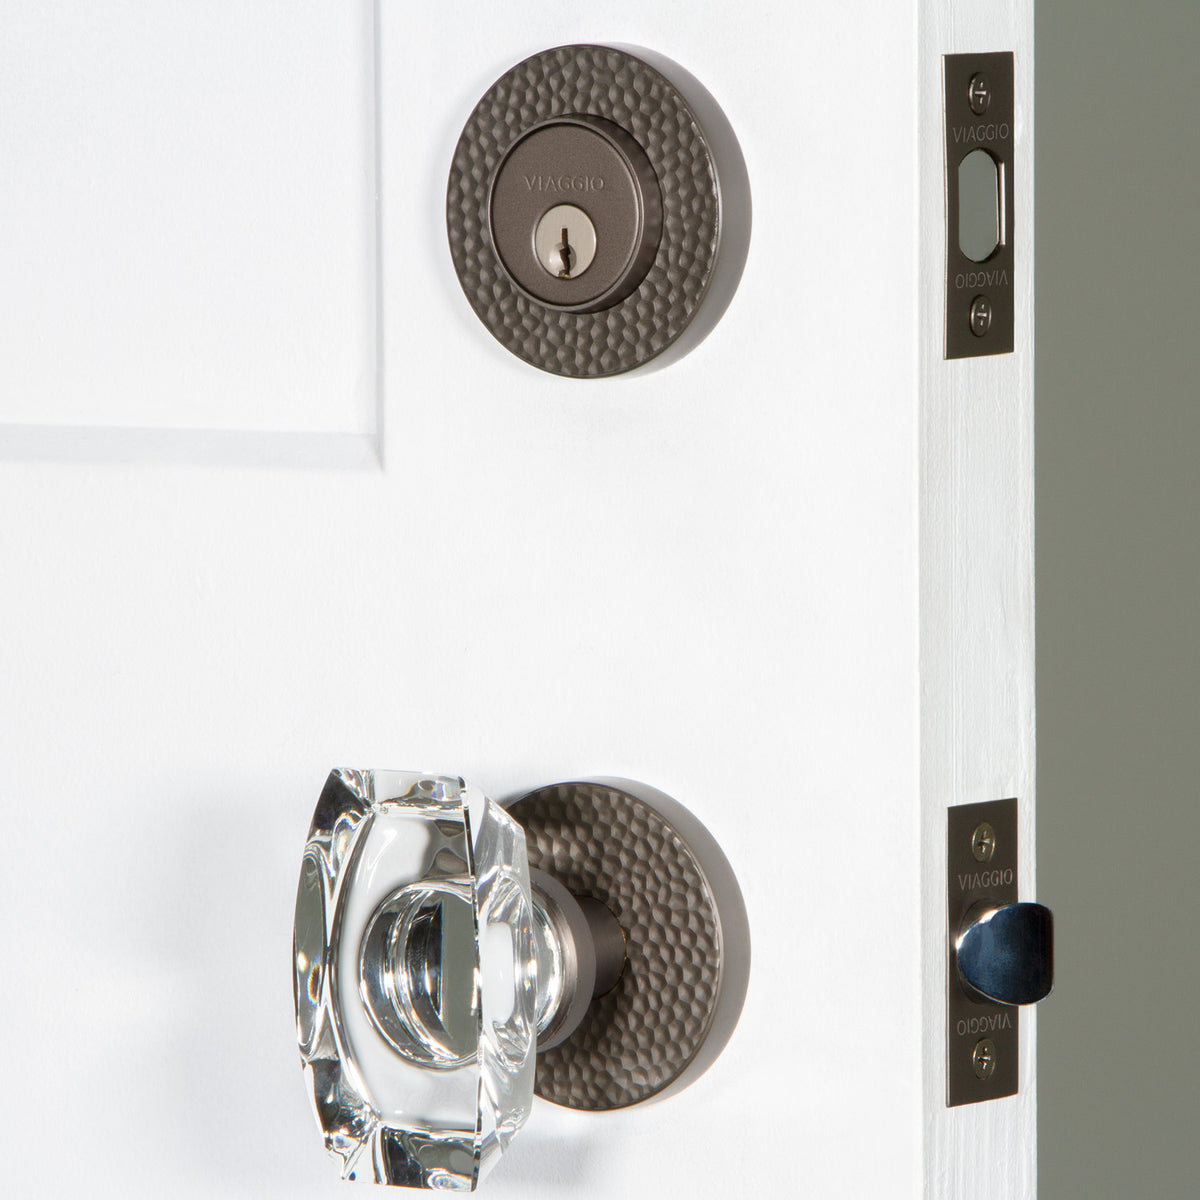 Circolo Hammered Rosette Entry Set with Stella Knob in Titanium Gray